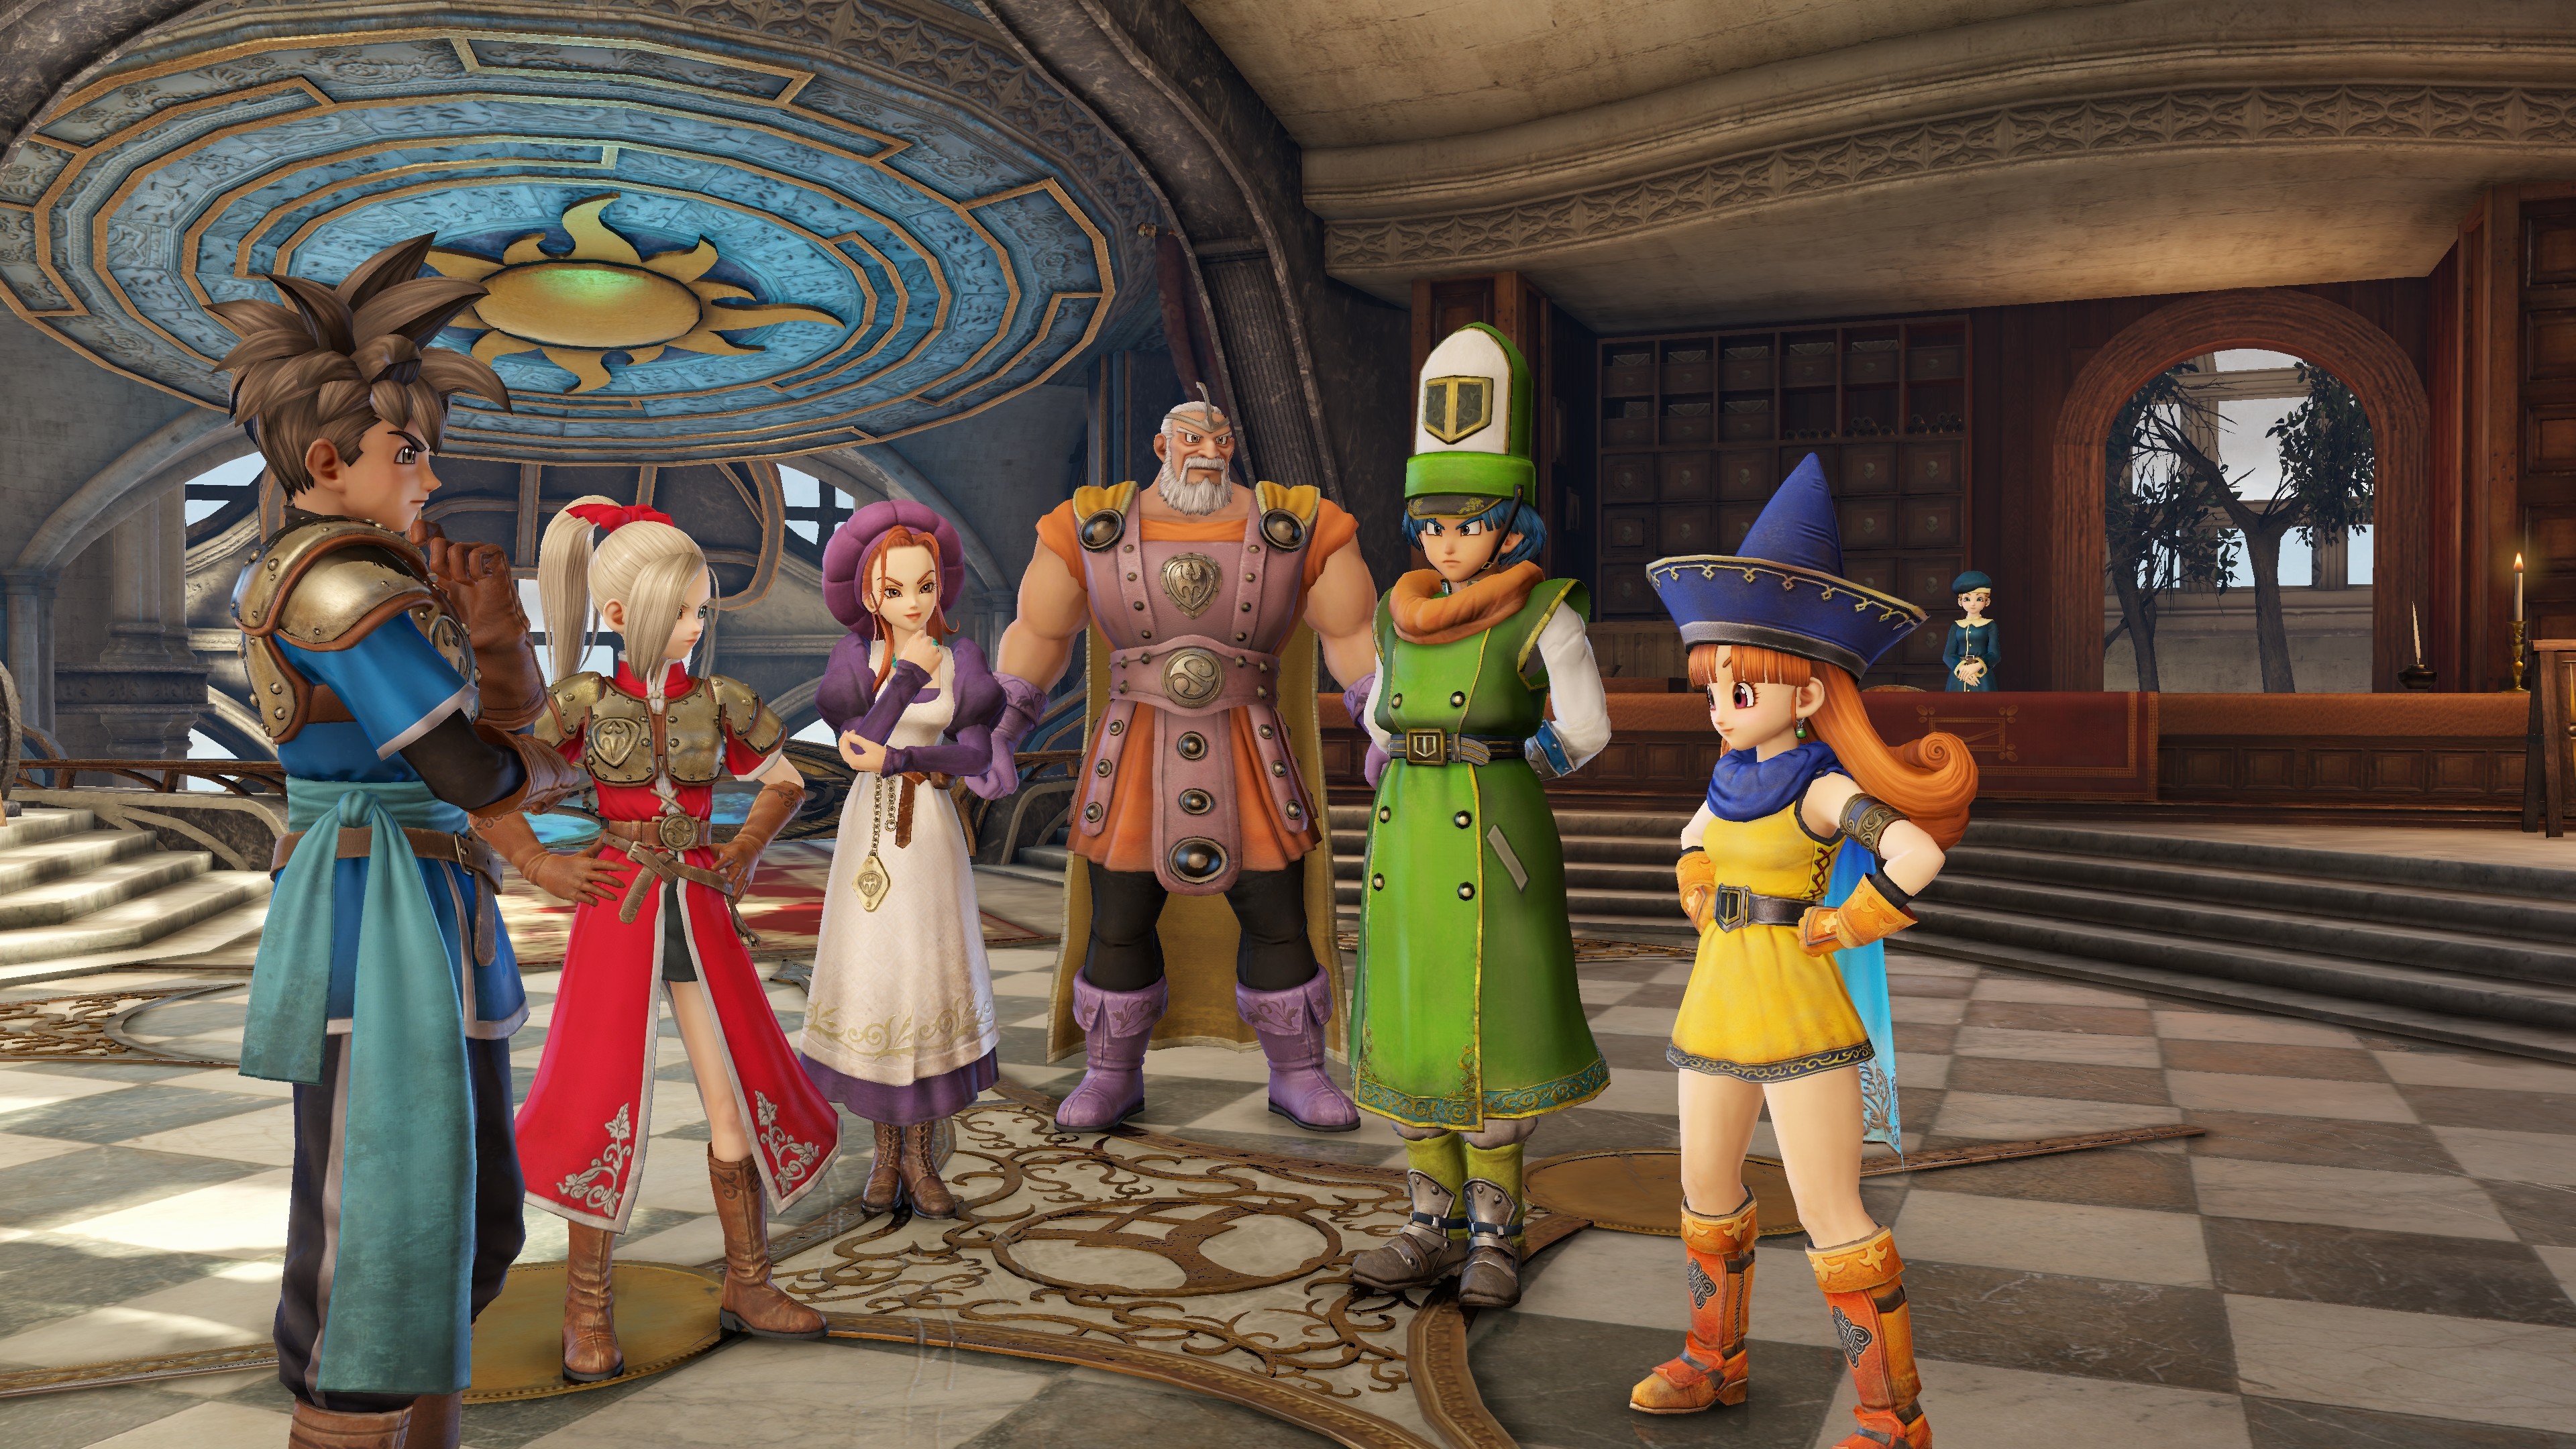 3840x2160 Dragon Quest Heroes 4k Ultra HD Wallpaper | Background Image |  |  ID:857955 - Wallpaper Abyss